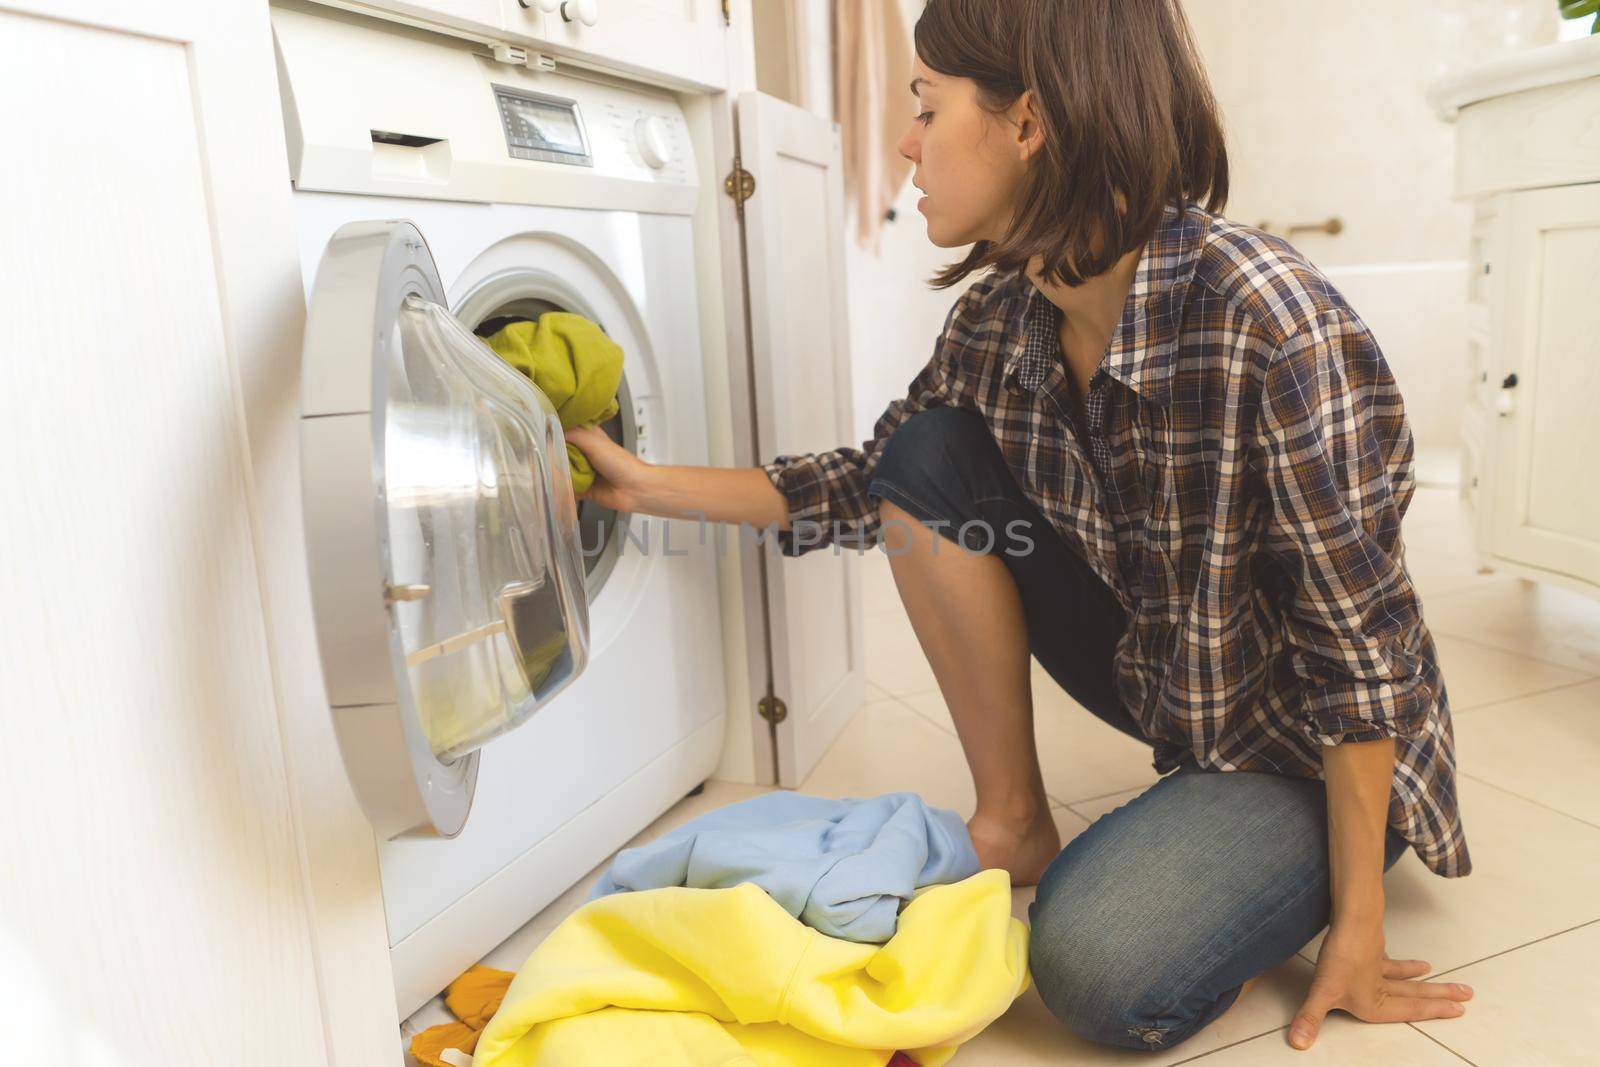 A young girl puts things in the washing machine, a woman sits on the floor of a cozy house and looks at the stain on her jacket, which needs to be removed with detergent.